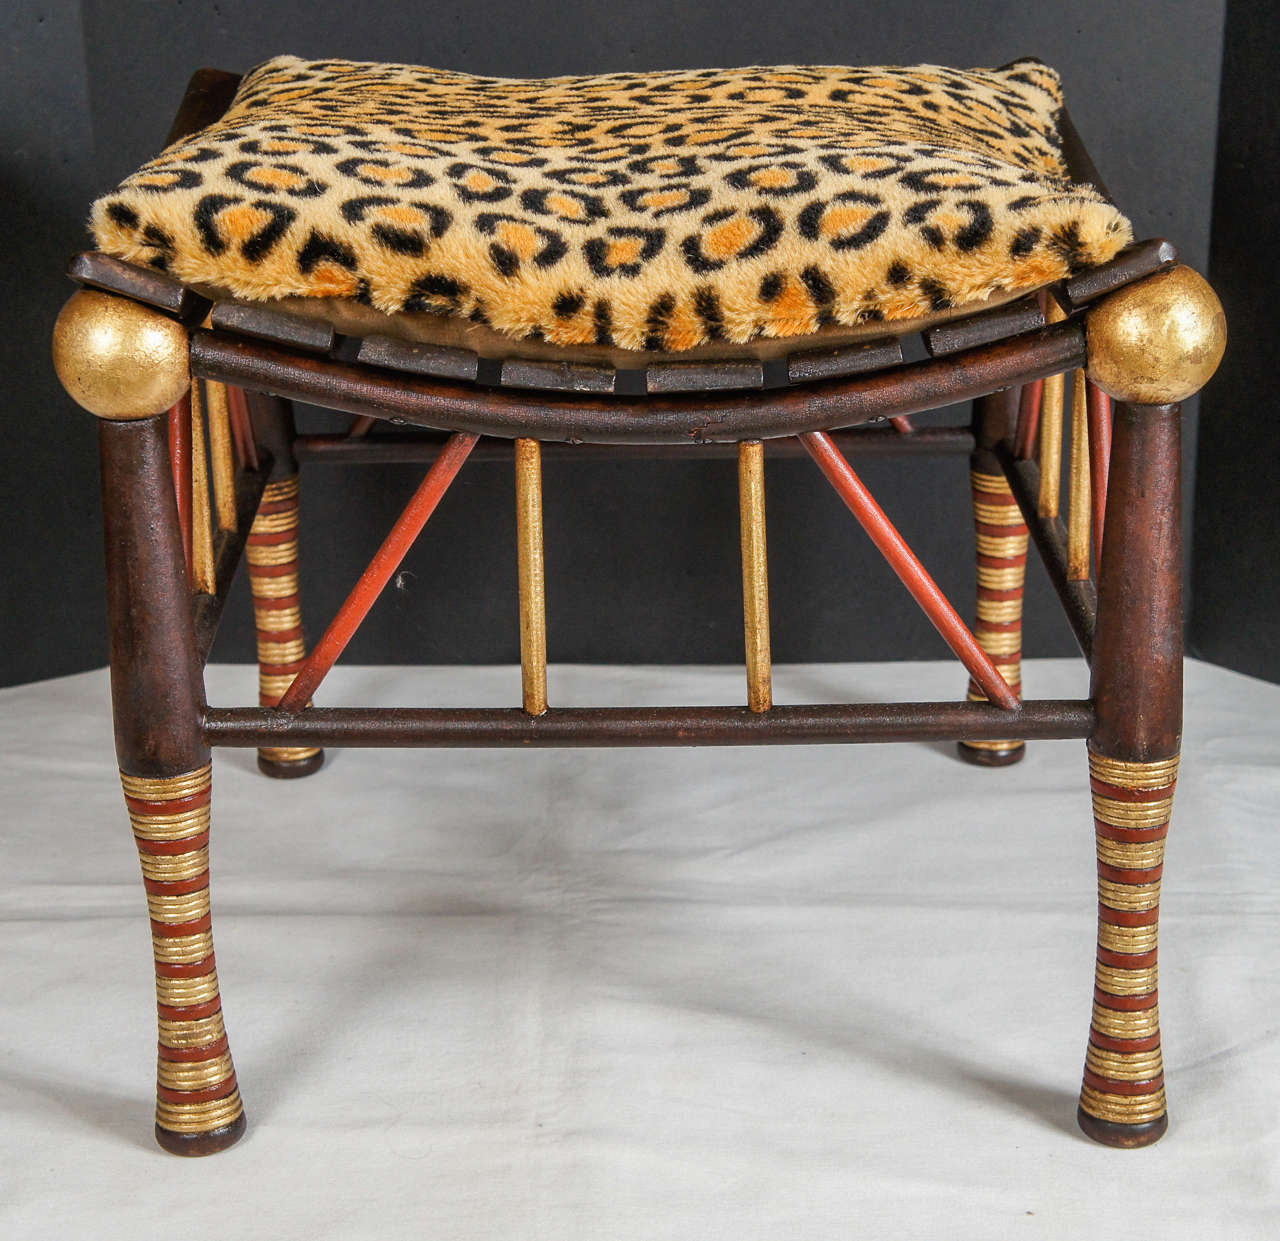 This stool made by Liberty of London is rarely seen in paint and gilded  details. Crafted in the late 19th century this stools looks back to ancient Egyptian models and is crafted by hand. In this version the legs turnings are gilded and painted in